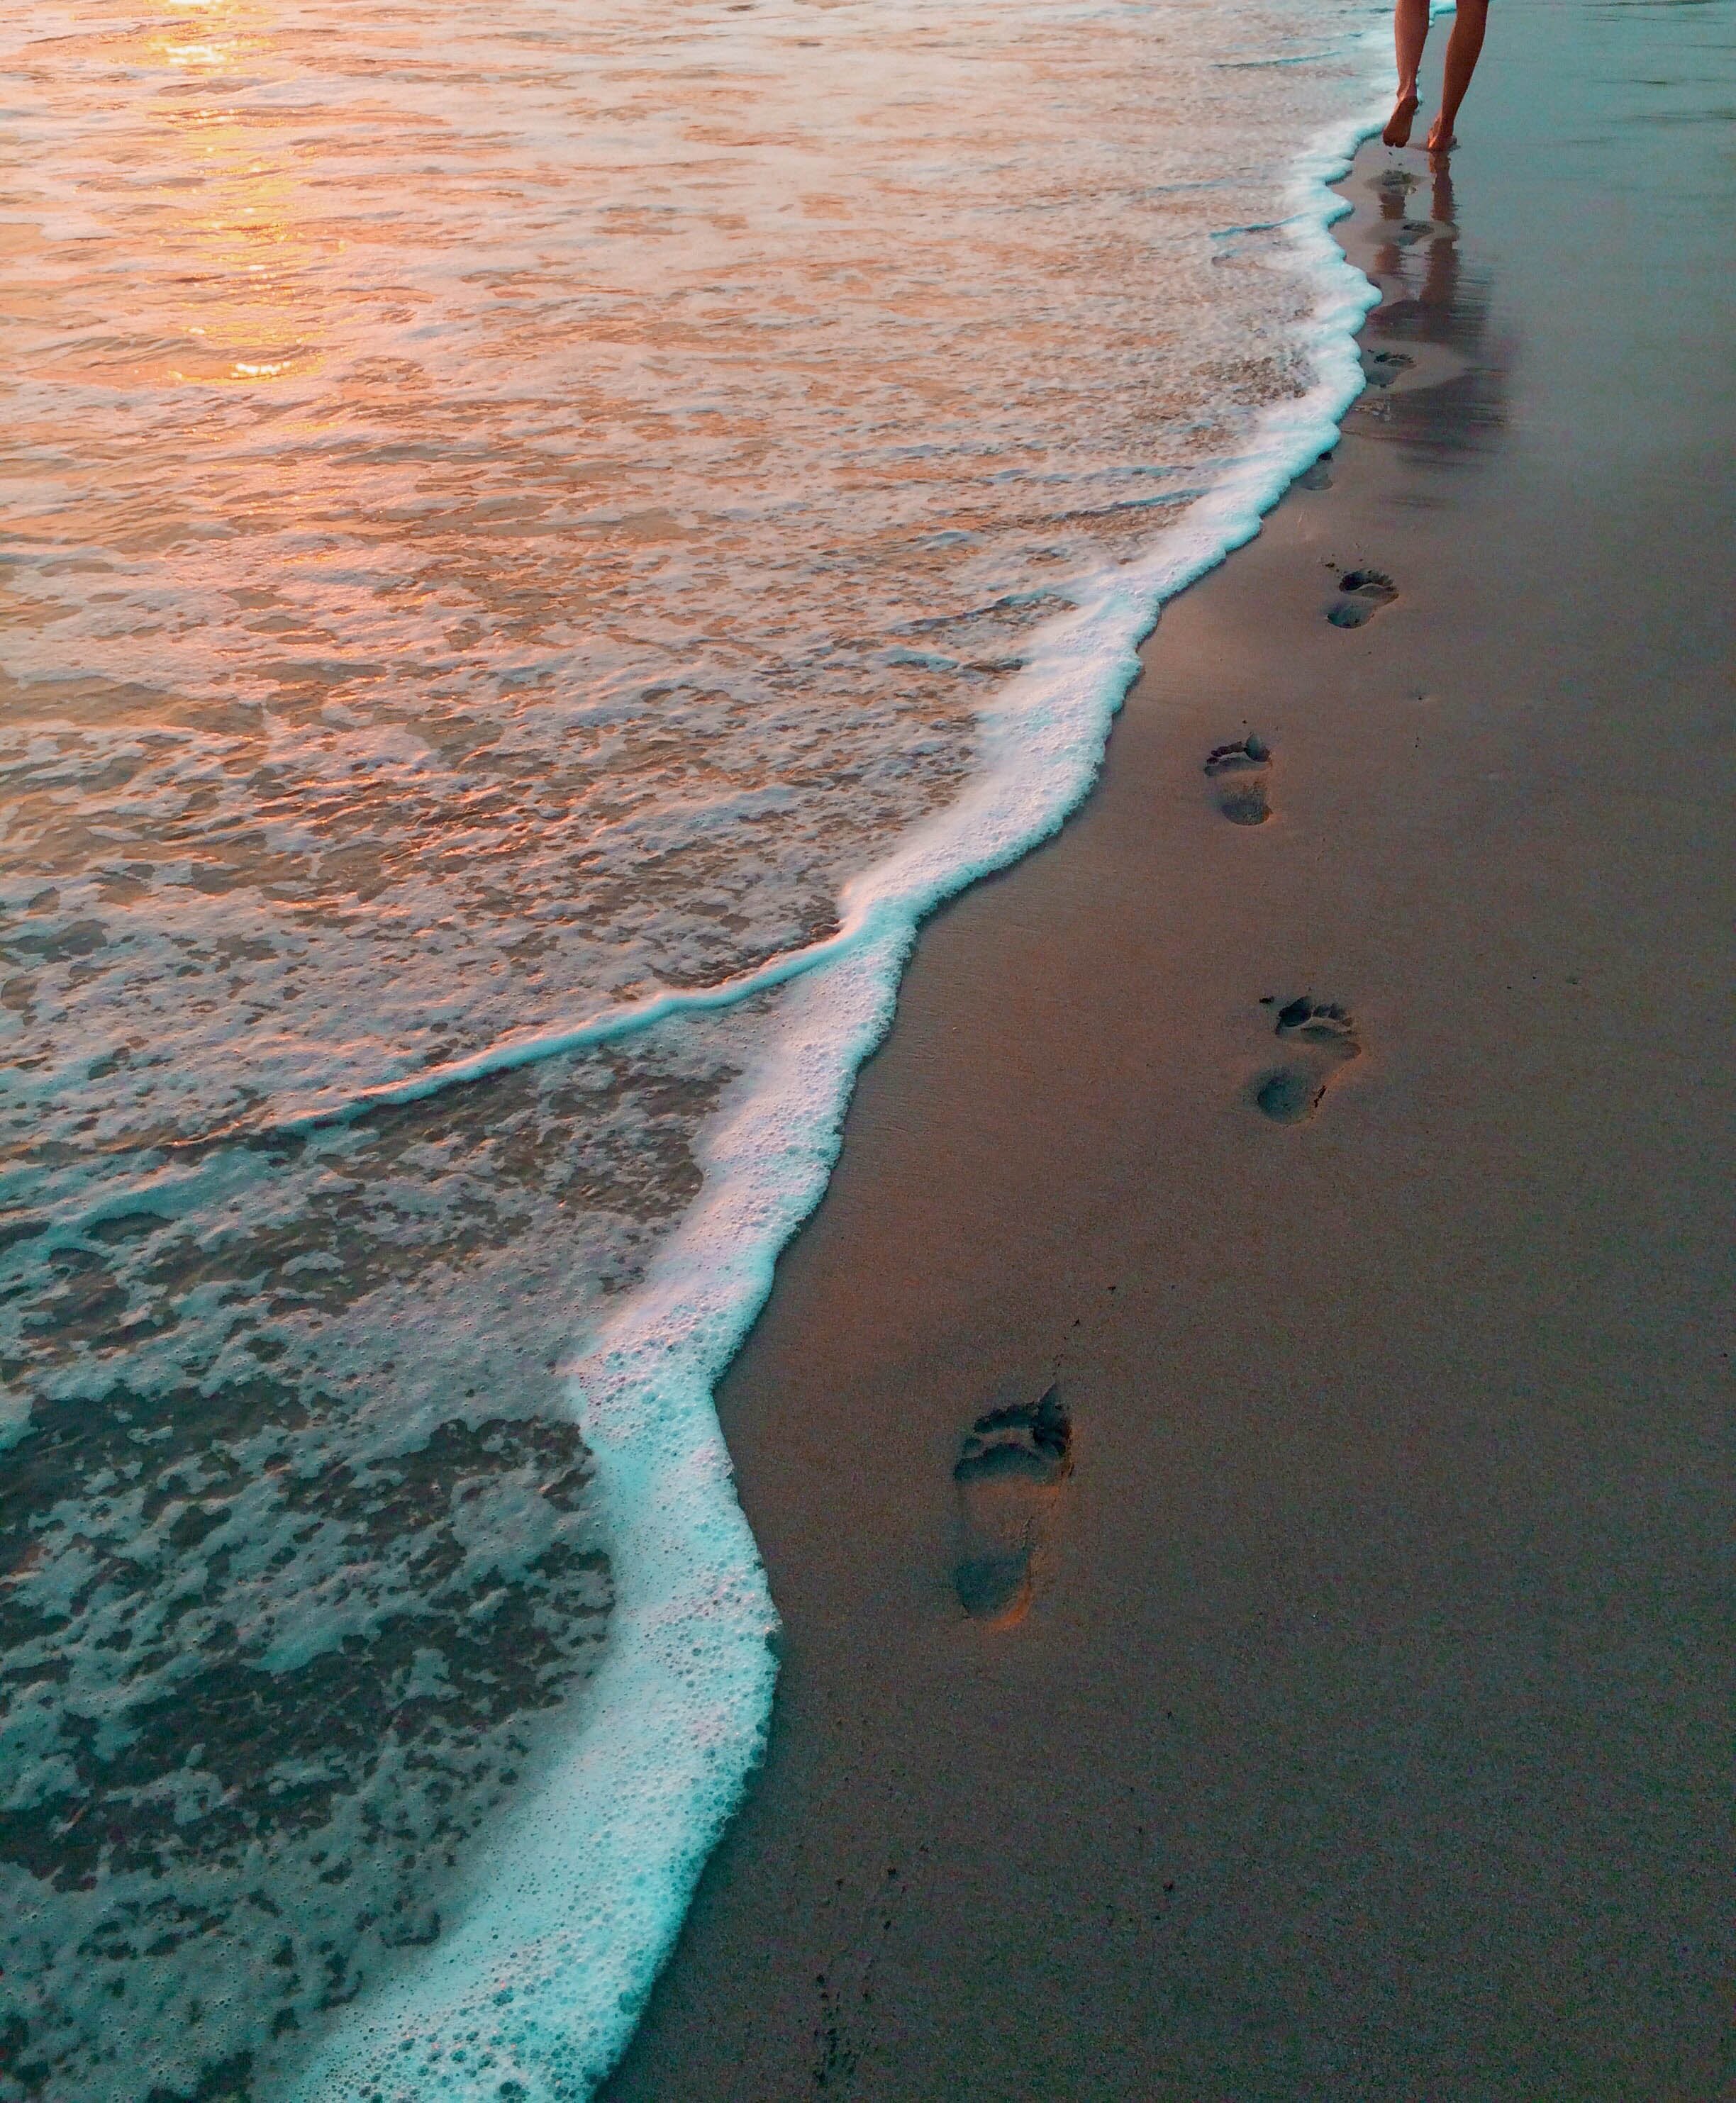 footprints being left behind person walking barefoot along the beach at sunset as a wave rises on the shore